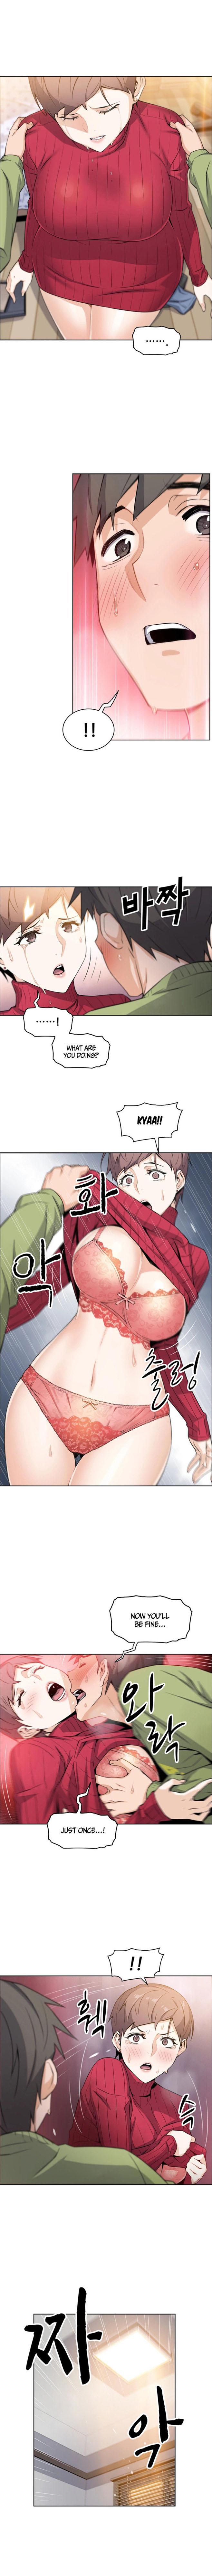 Housekeeper [Neck Pillow, Paper] Ch.49/49 [English] [Manhwa PDF] Completed 56